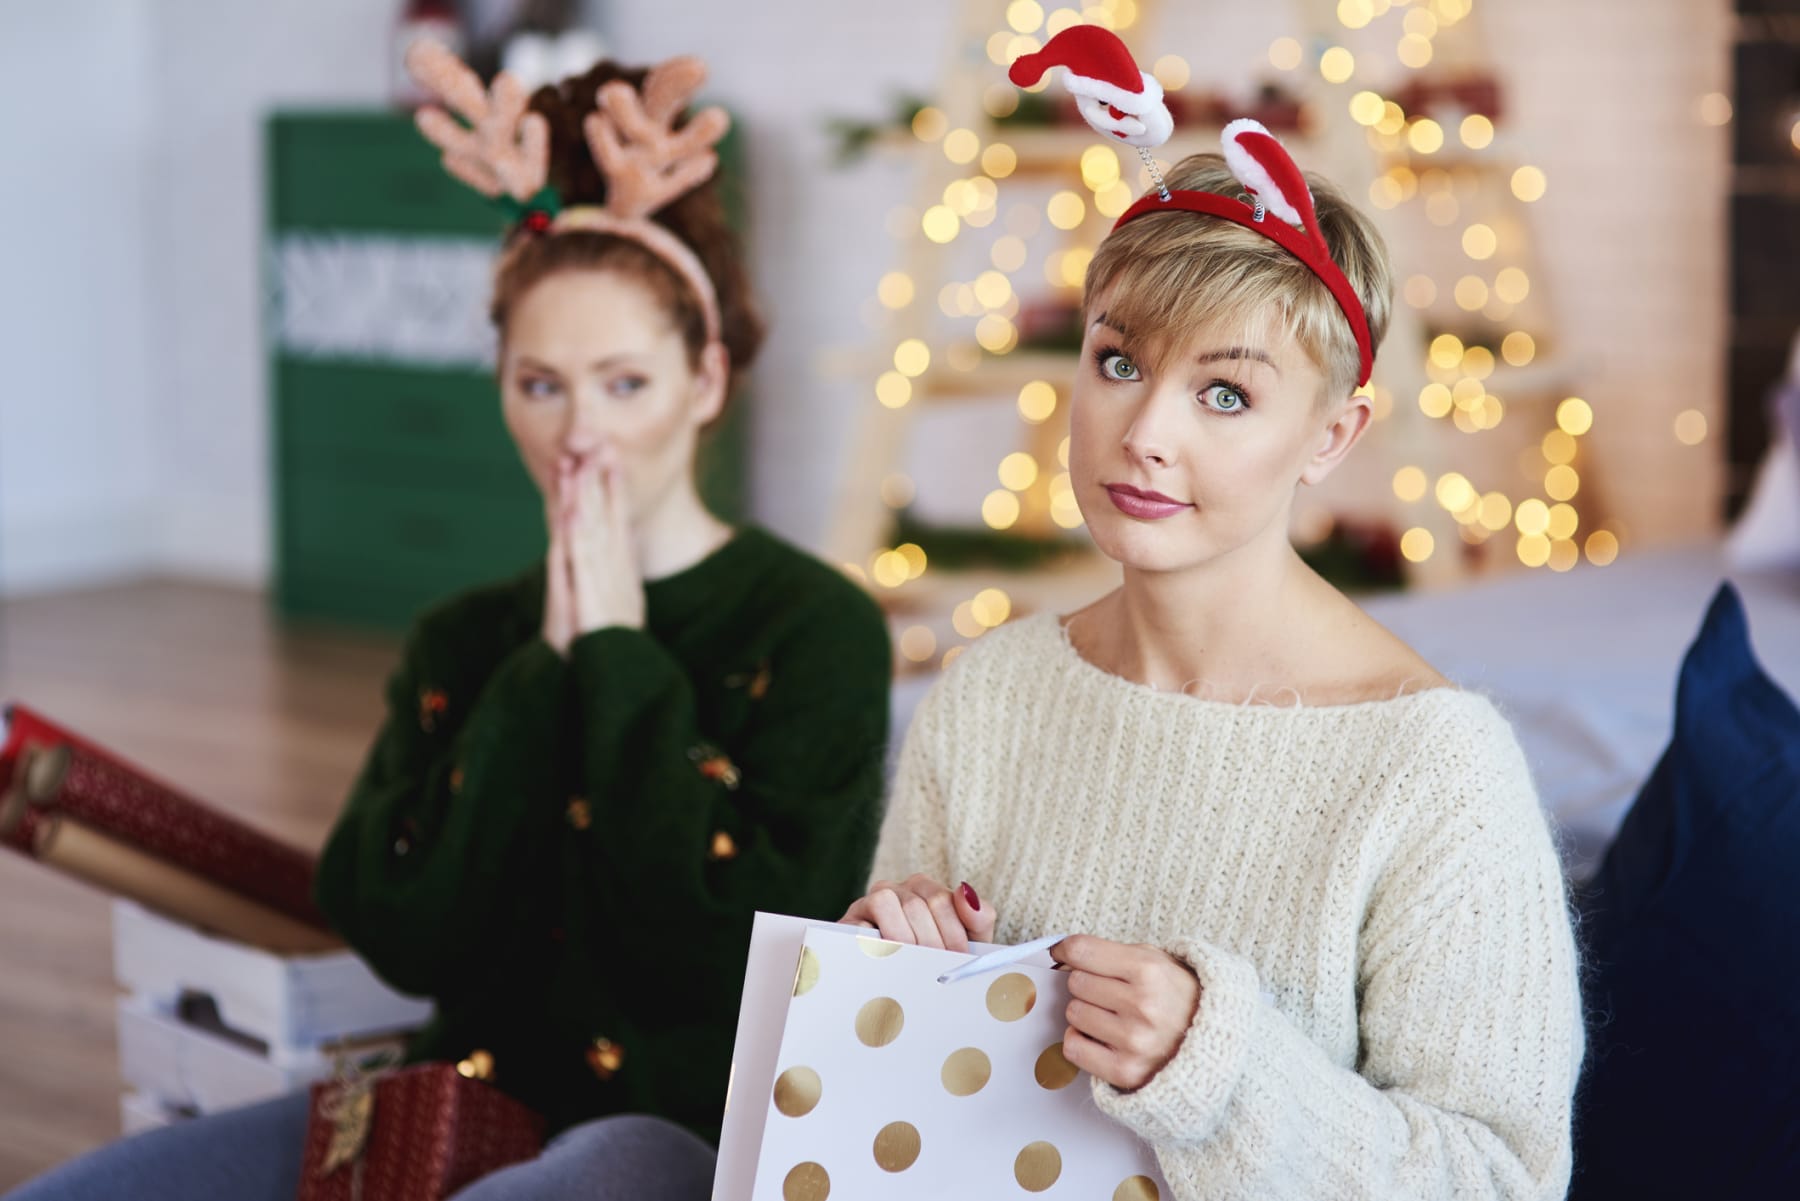 Woman looking unhappy about holiday gift.